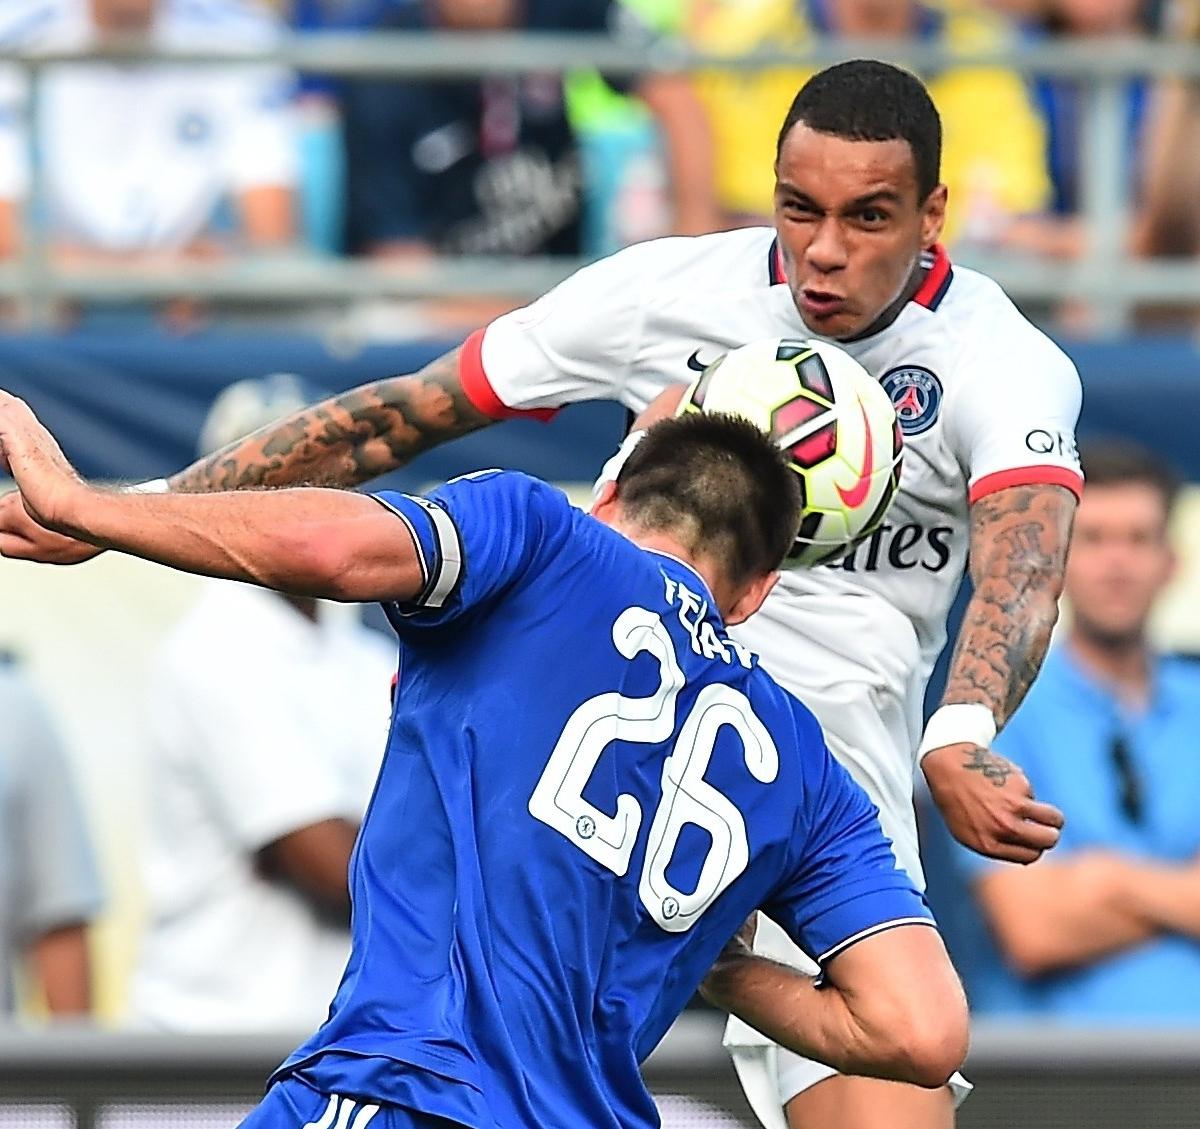 Chelsea vs. PSG Lessons Learned from International Champions Cup